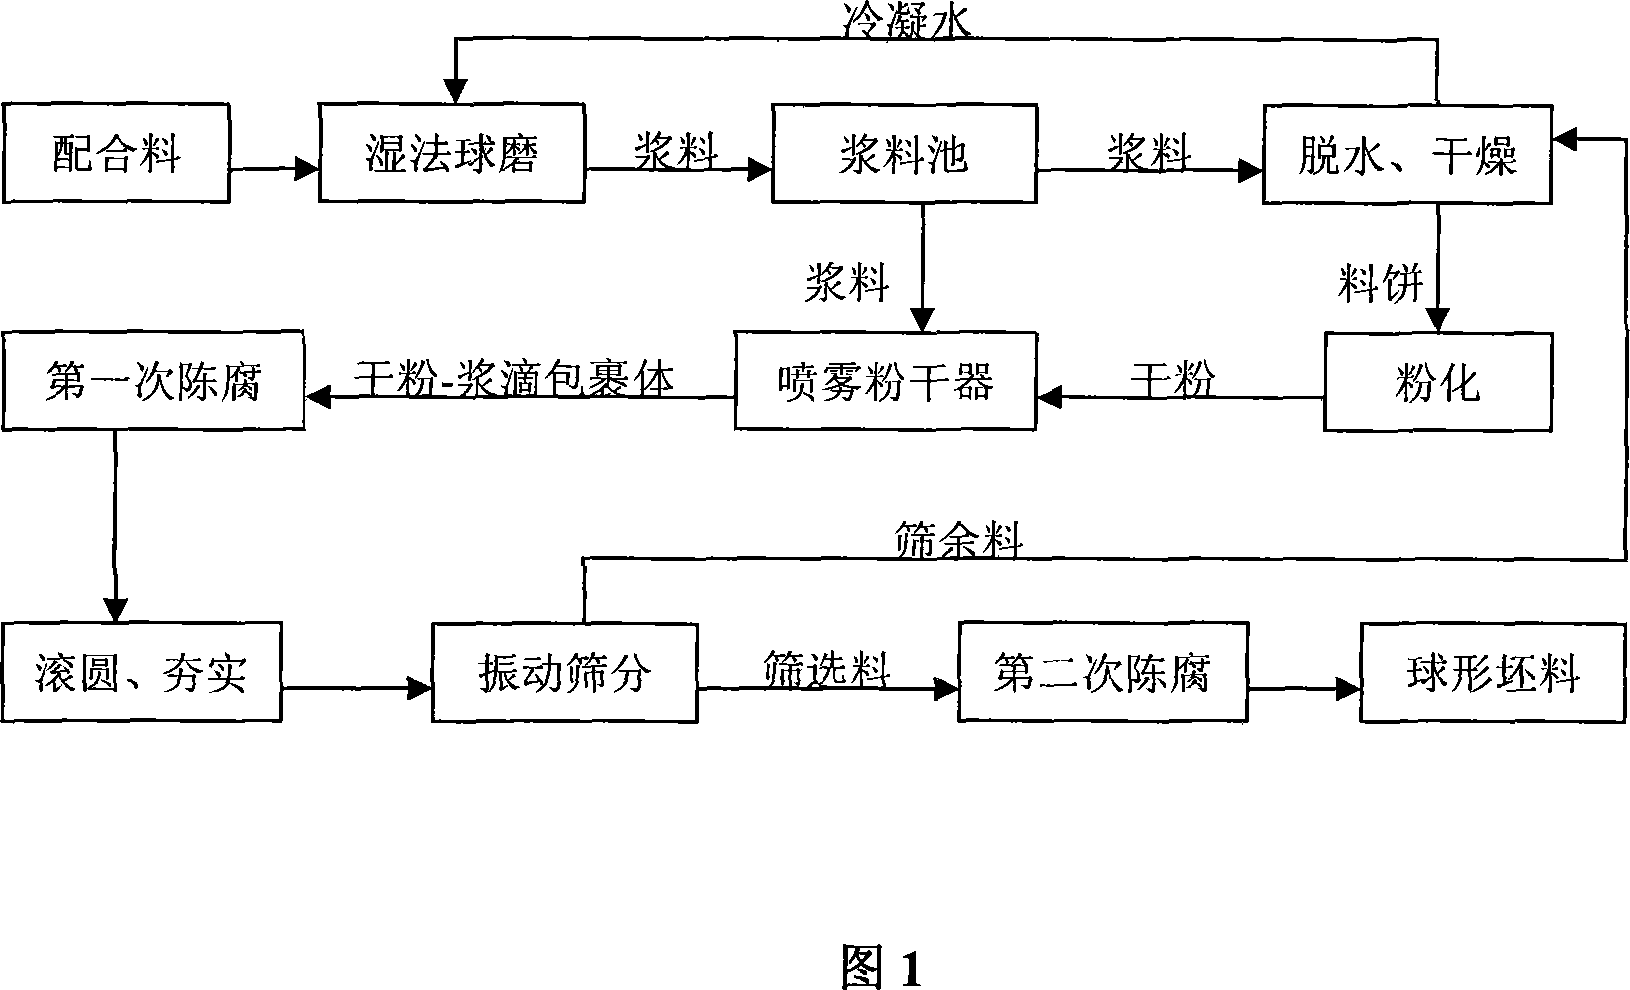 Technology for preparing blank for constructive ceramic with semi-drying method